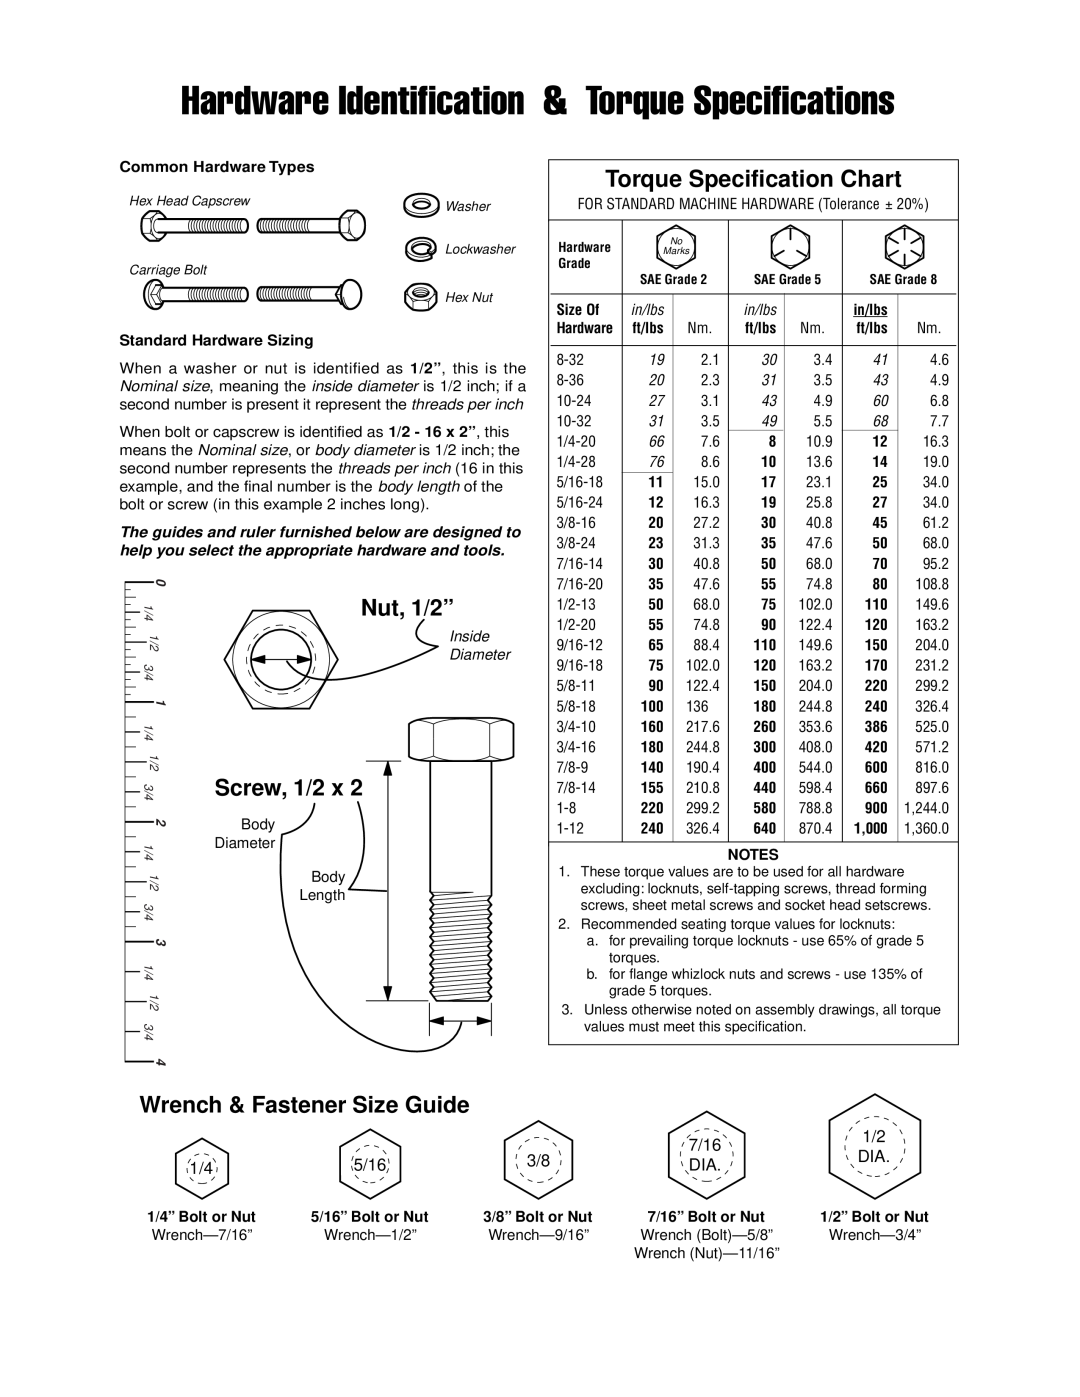 Simplicity 1694376 Torque Specification Chart, 7/16, 5/16, Hardware Identification & Torque Specifications, Nut, 1/2” 